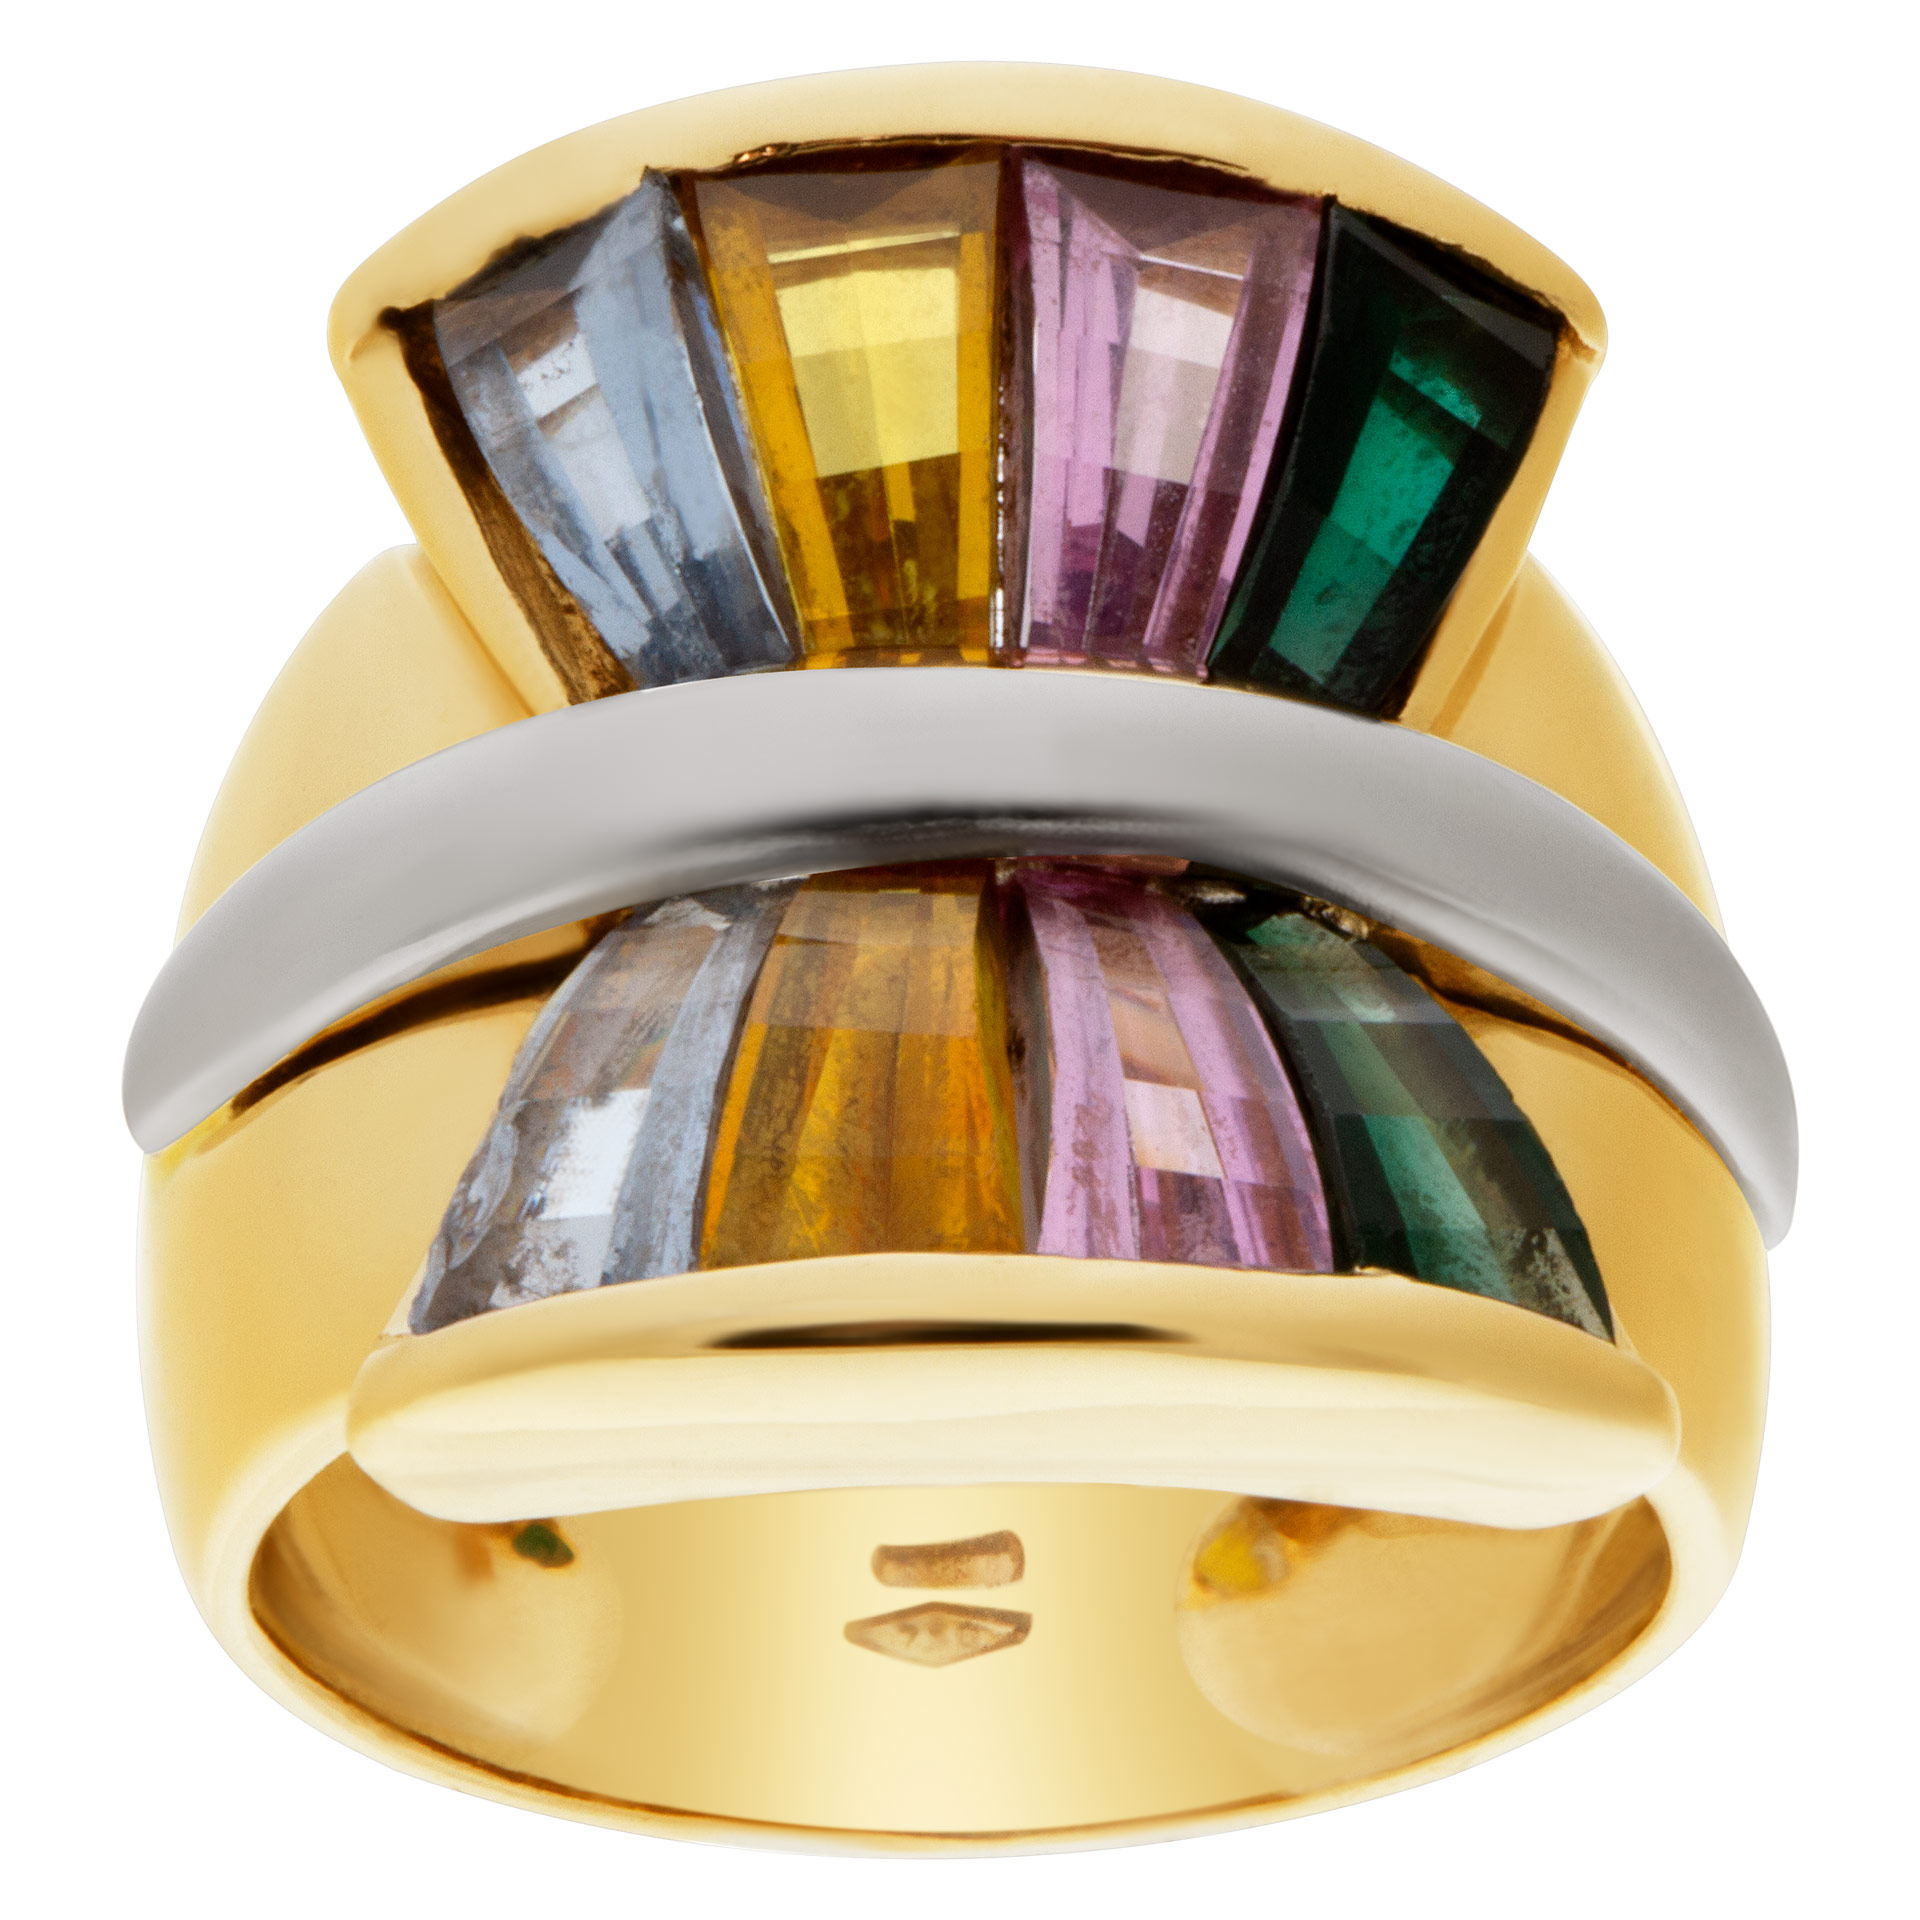 "Colorful Fan" tapered baguette cut colorful semi-precious stone ring in 14k image 1